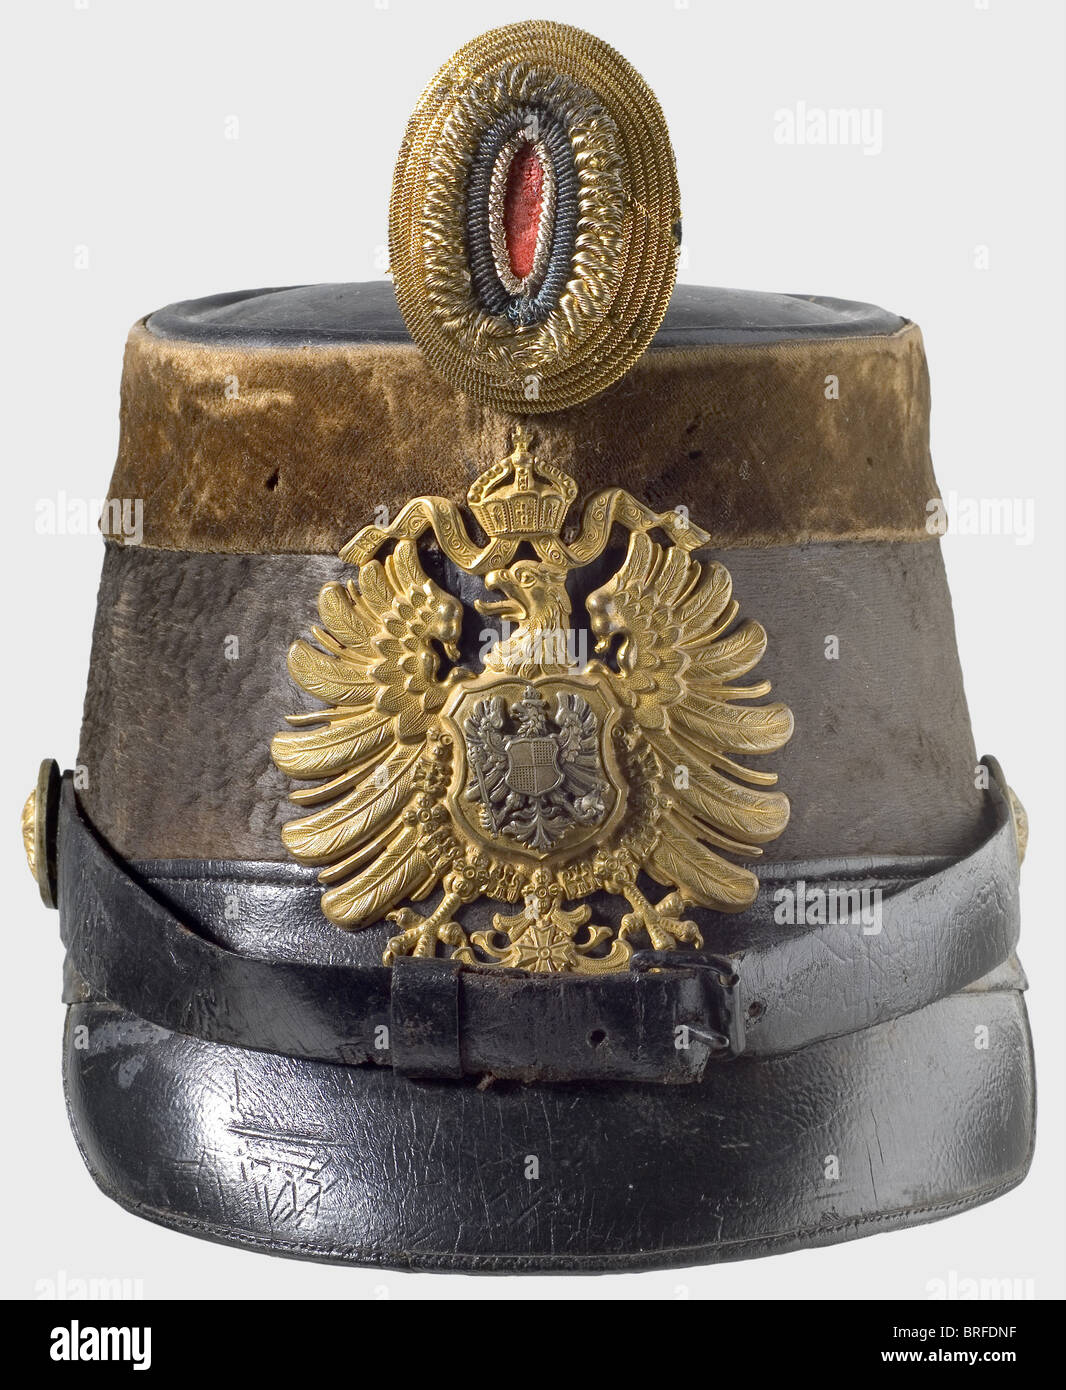 A shako for a customs official, circa 1880. Black mohair felt body, leather top, strap, and peak. A brown velvet band around the upper edge. Gilded imperial eagle plate with a seperate inescutcheon eagle overlay, Leather chinstraps on rosette buttons. Gold-black-red officer's field badge. (Feldzeichen). Lining missing. historic, historical, 19th century, German Empire, Germany, Imperial, object, objects, stills, clipping, cut out, cut-out, cut-outs, militaria, weapon, arms, weapons, arms, uniform, piece, pieces, Stock Photo